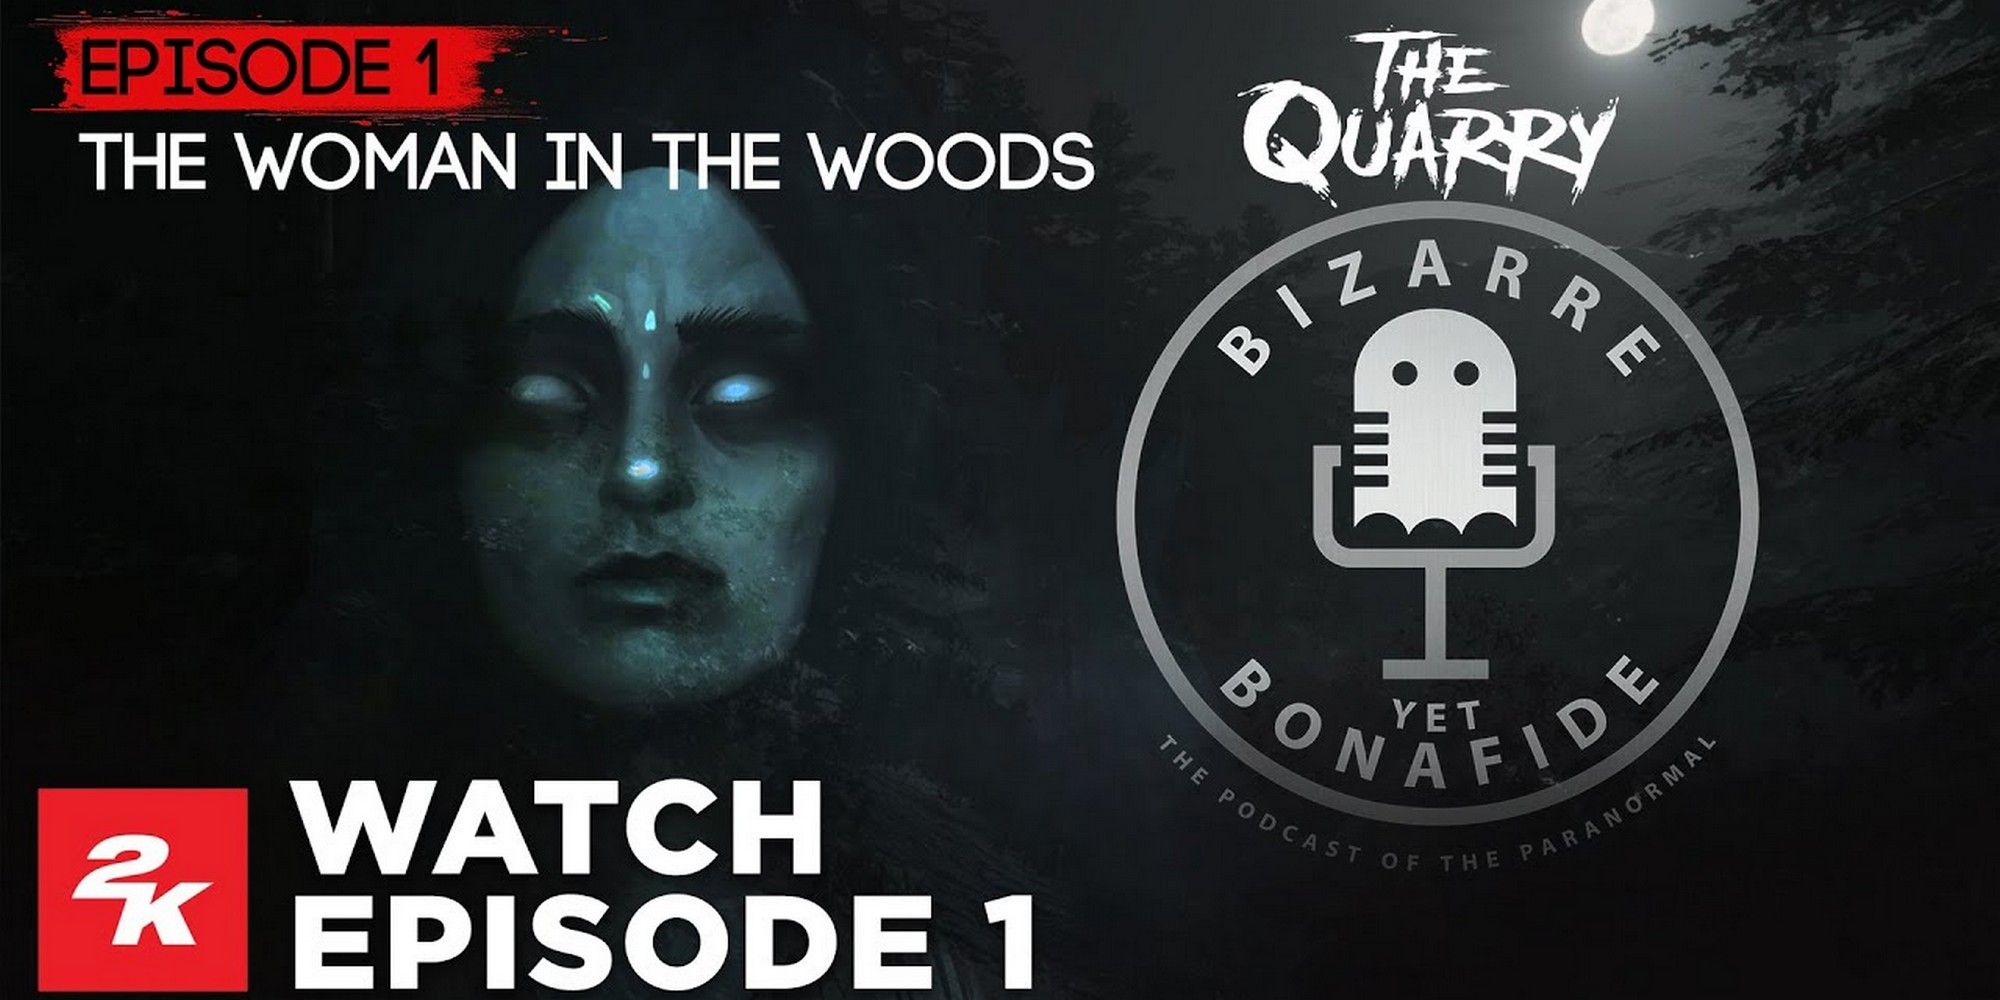 The Bizarre Yet Bonafide Podcast from The Quarry